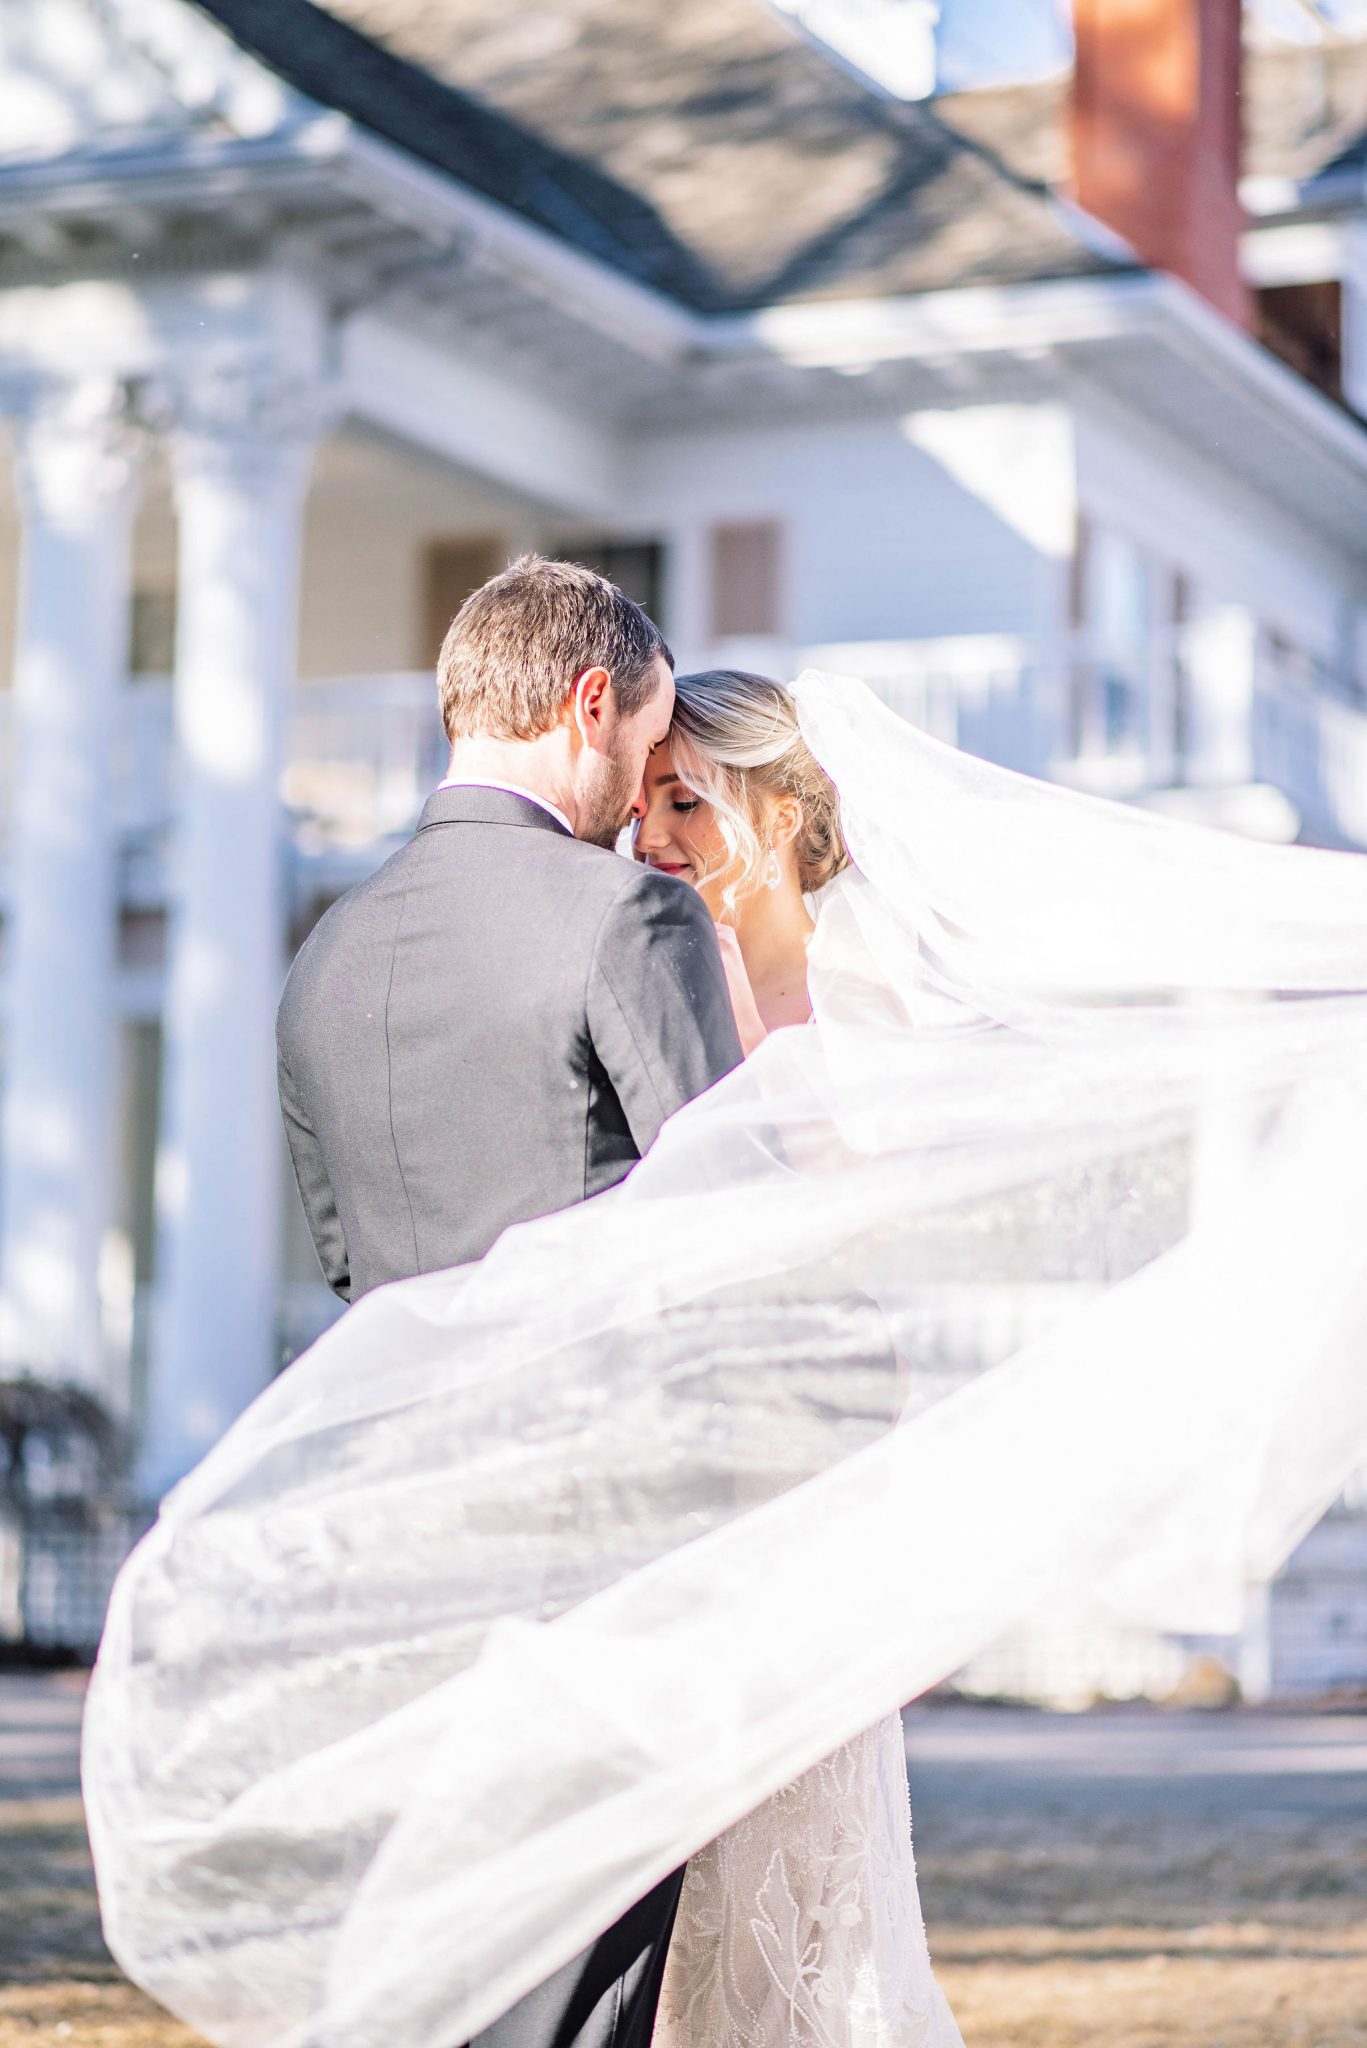 Bride's long flowing veil flies in the wind outside the Noralnd Historic Estate Venue